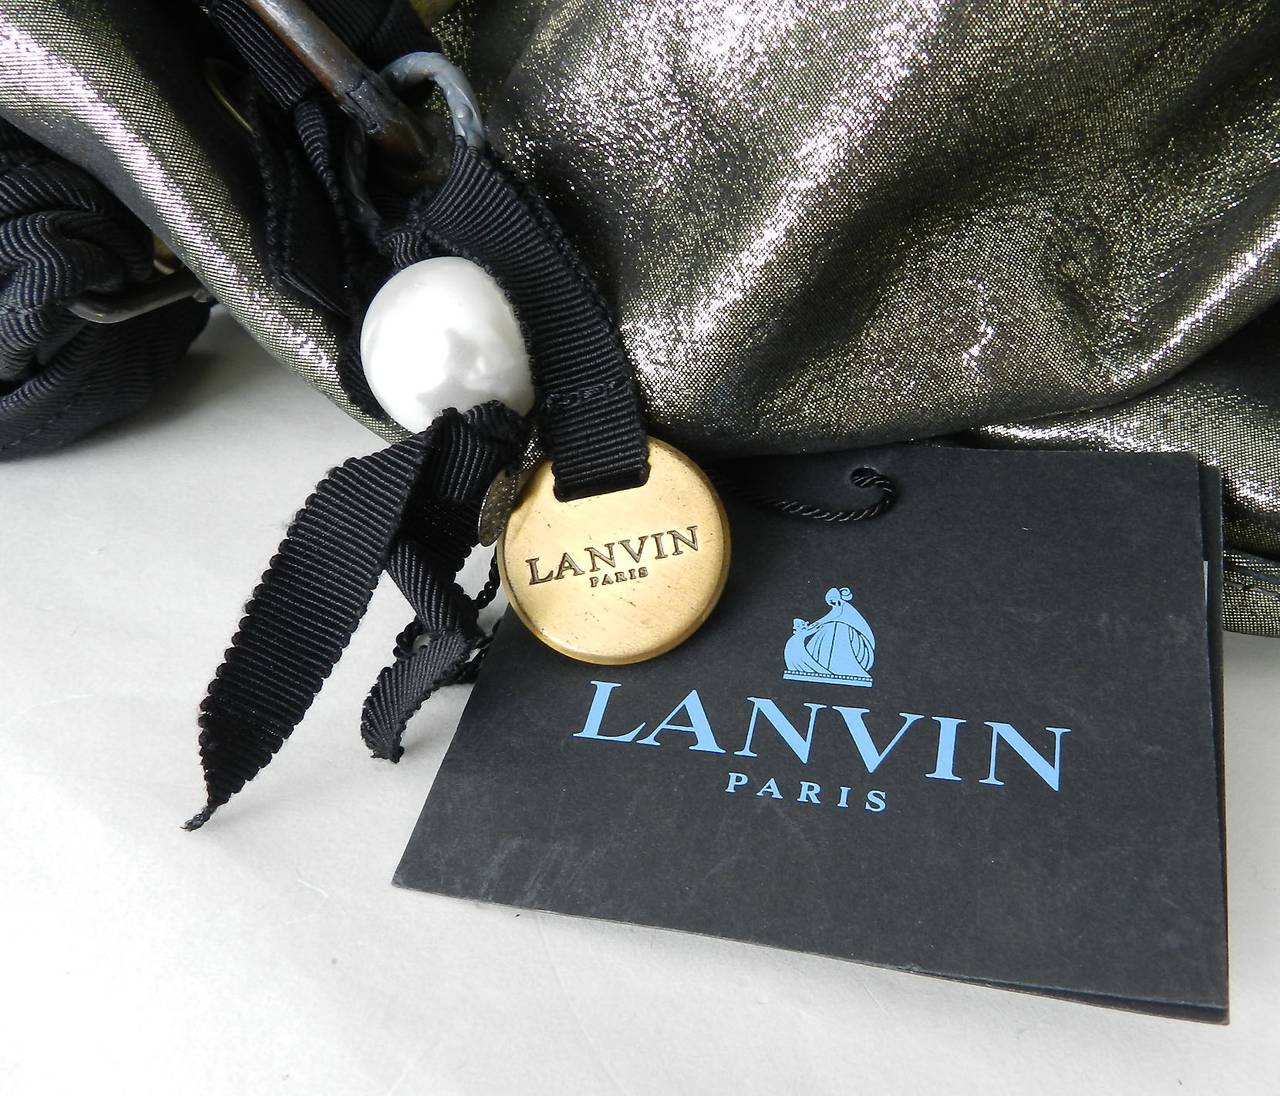 Lanvin Polisson bag. Large size with metallic coated leather and black fabric handles. Very roomy interior, small zip pouch, pearl and metal logo keychain. Excellent previously owned condiiton. Body measures about 20 x 15 x 8